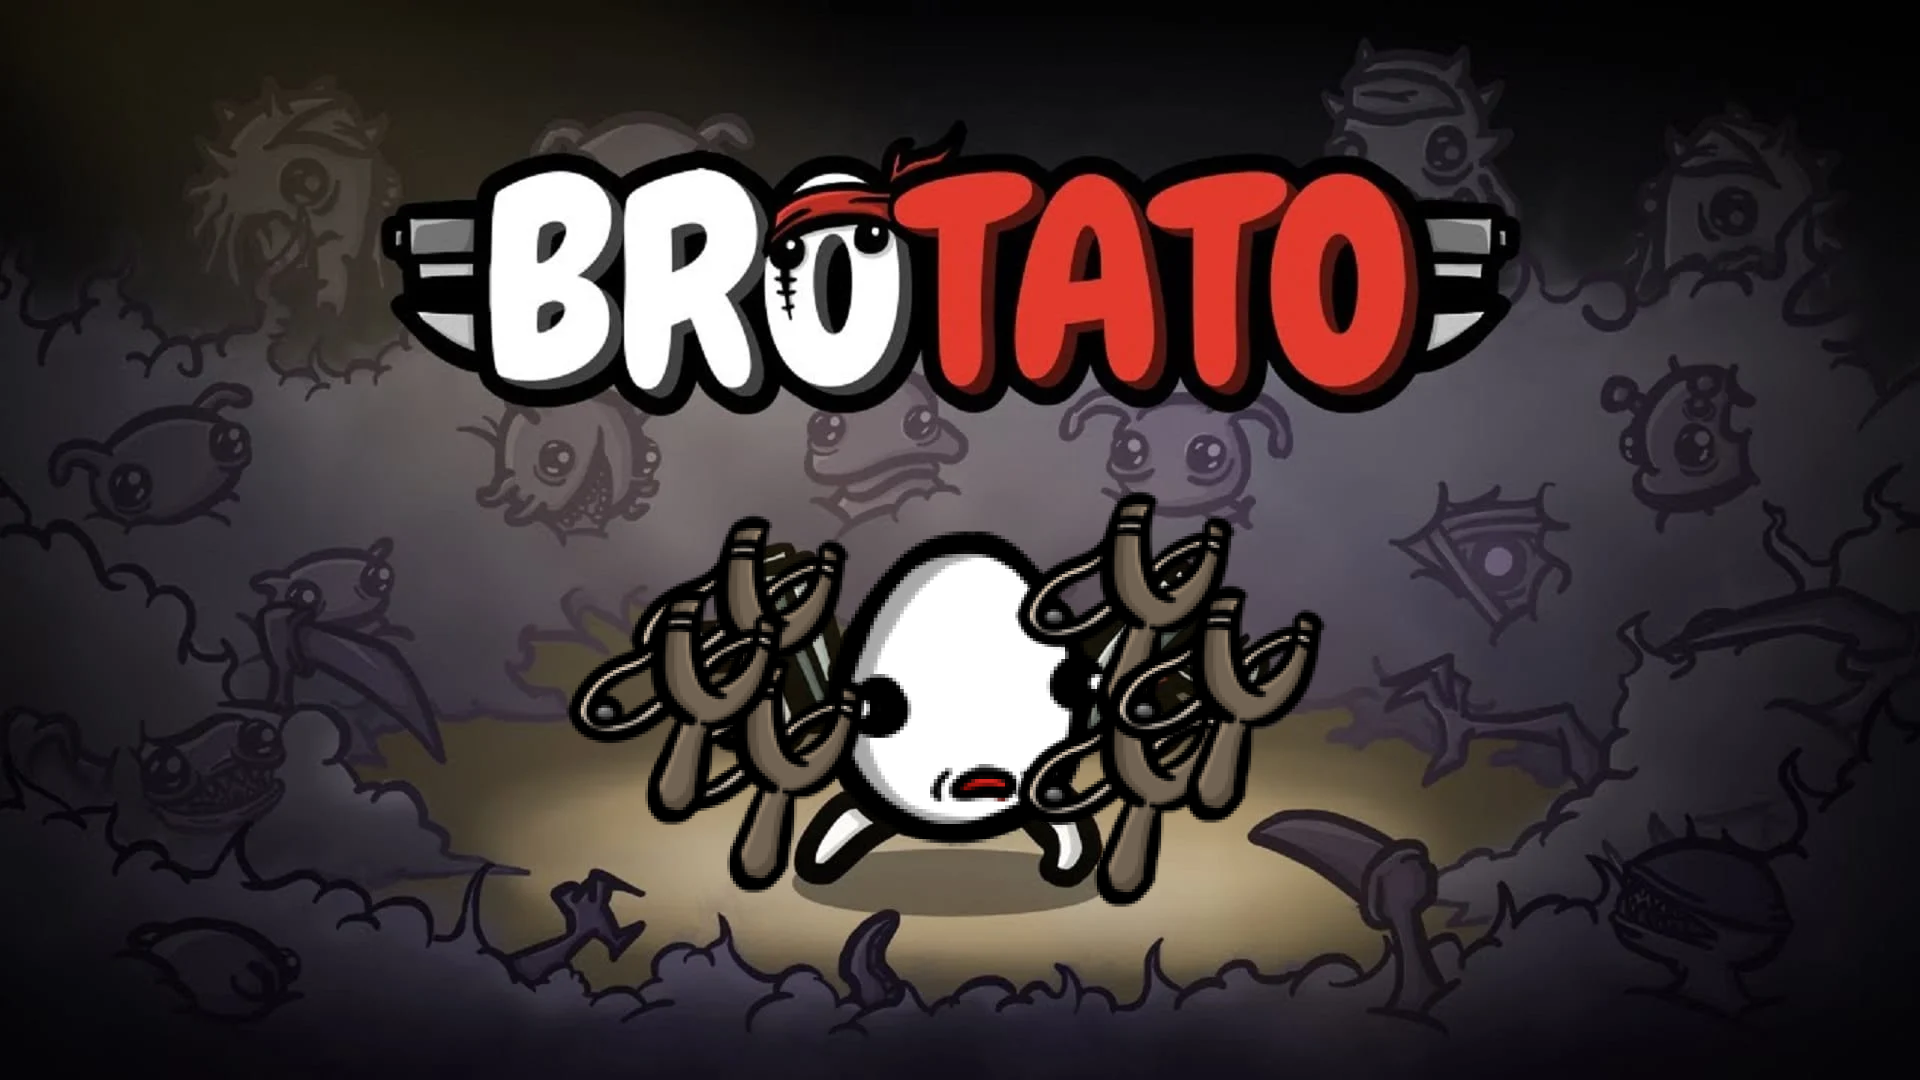 Brotato: Lucky Build - The ultimate Guide